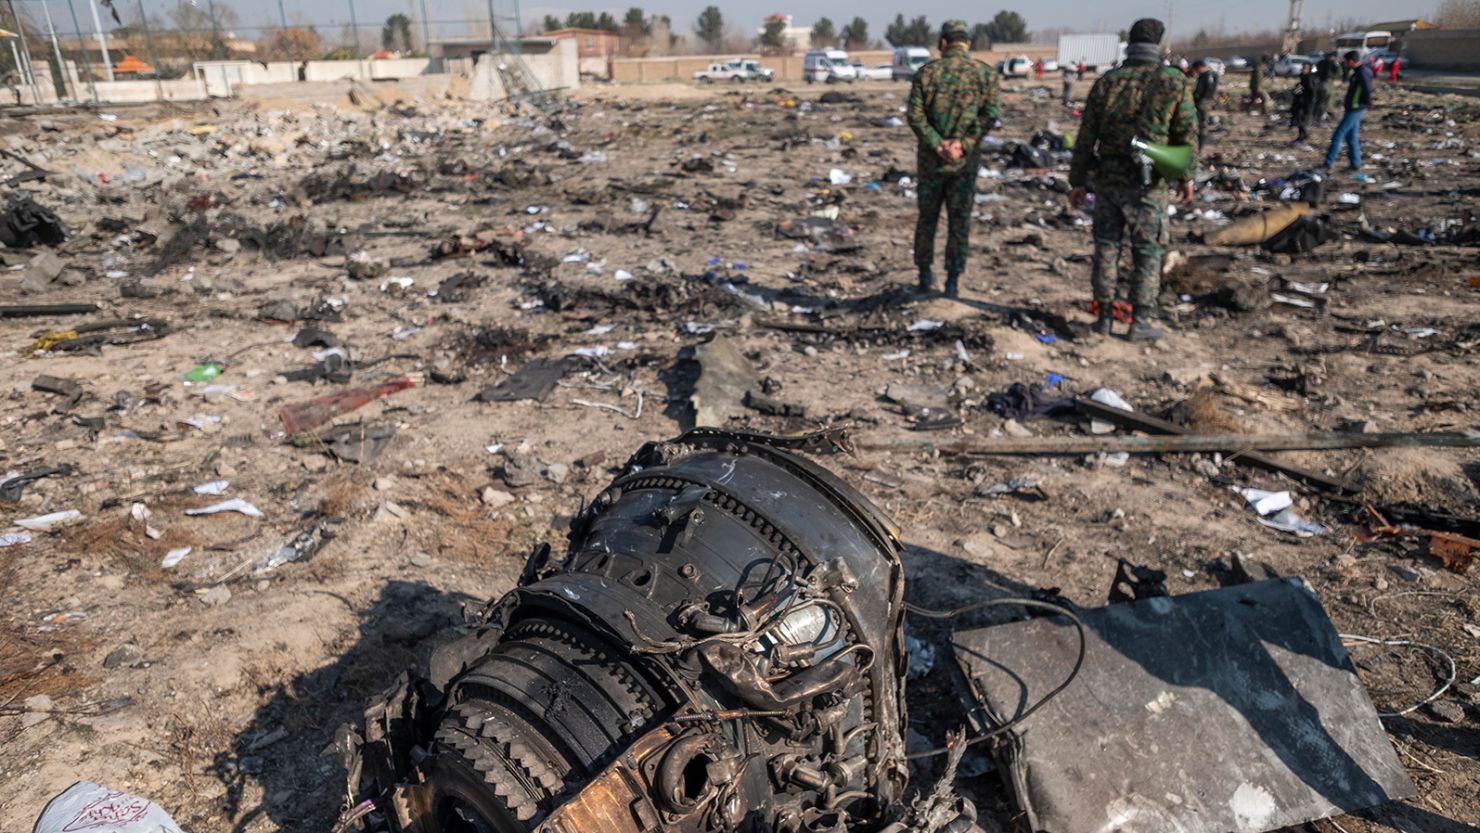 A piece of wreckage from the Ukrainian flight PS752 International airlines is seen at the site of a crash about 50km south of Tehran. 